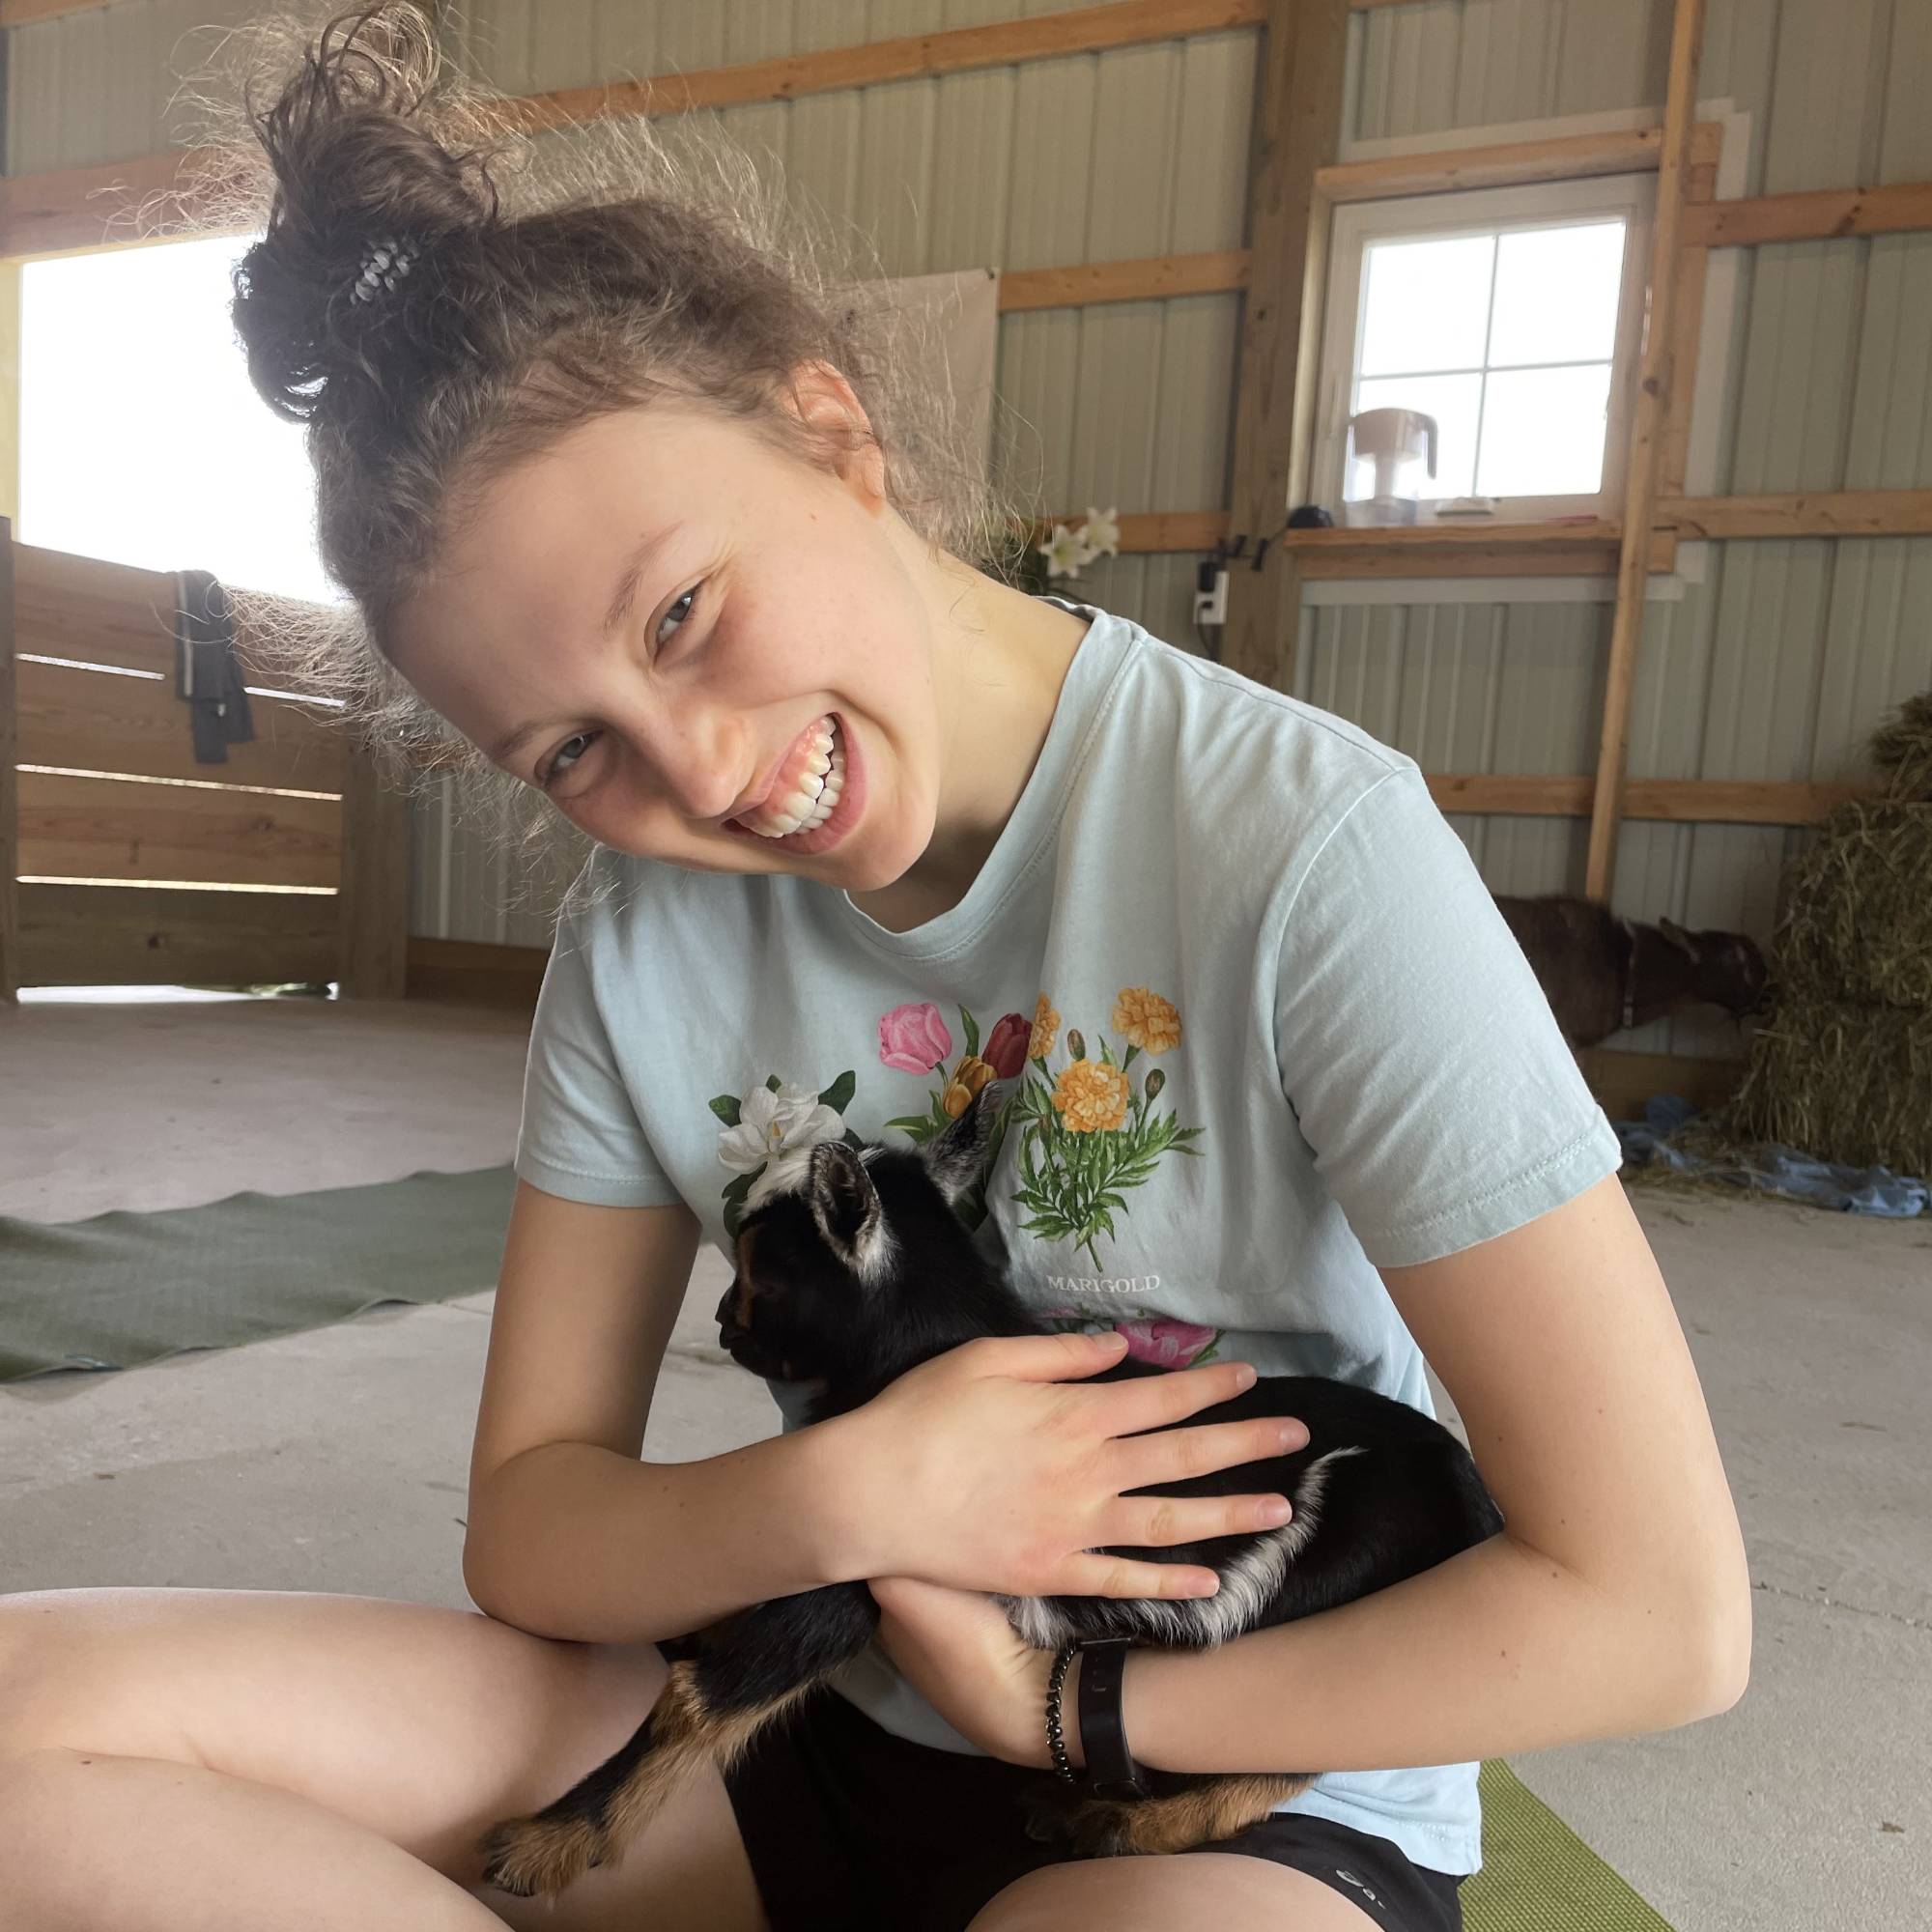 Smiling girl holding a goat